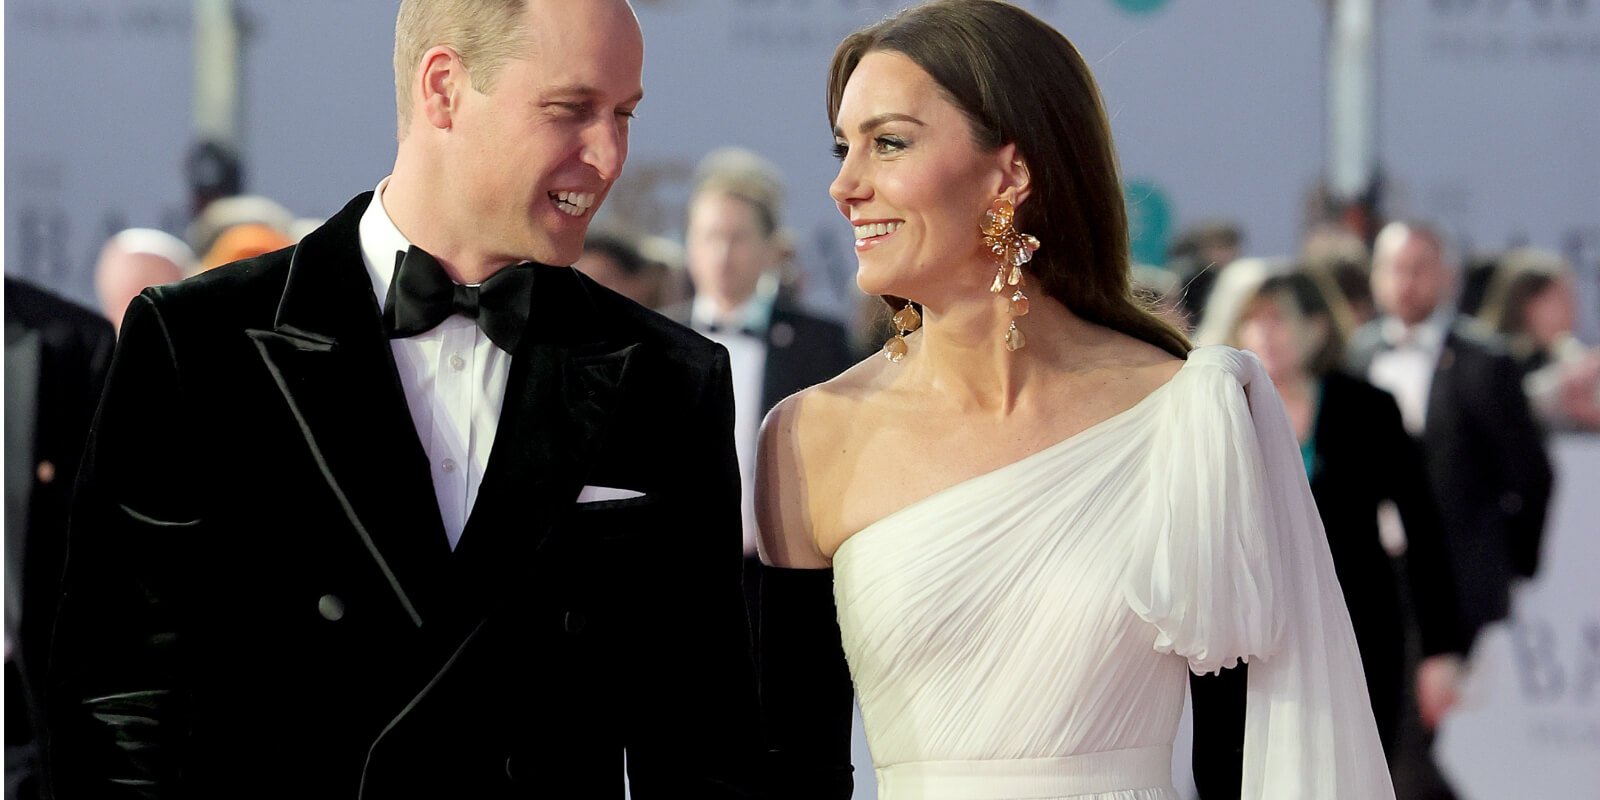 Prince William and Kate Middleton arrive on the BAFTAs red carpet where Kate playfully patted her husband's behind.